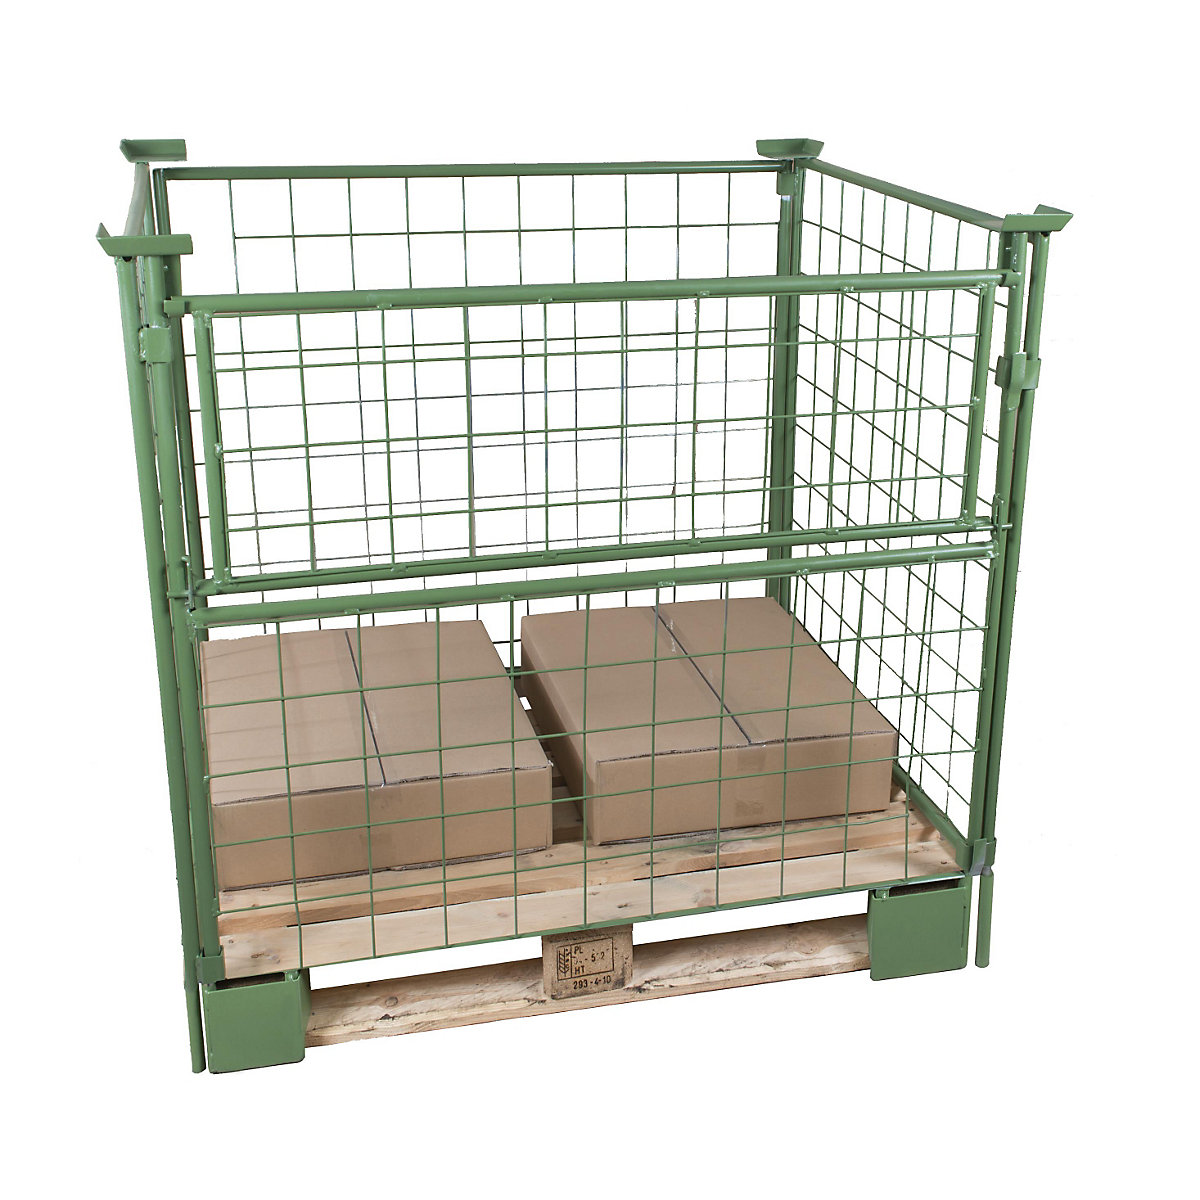 Pallet frame, effective height 800 mm, for stacking, WxL 800 x 1200 mm, 1 long side can be half folded